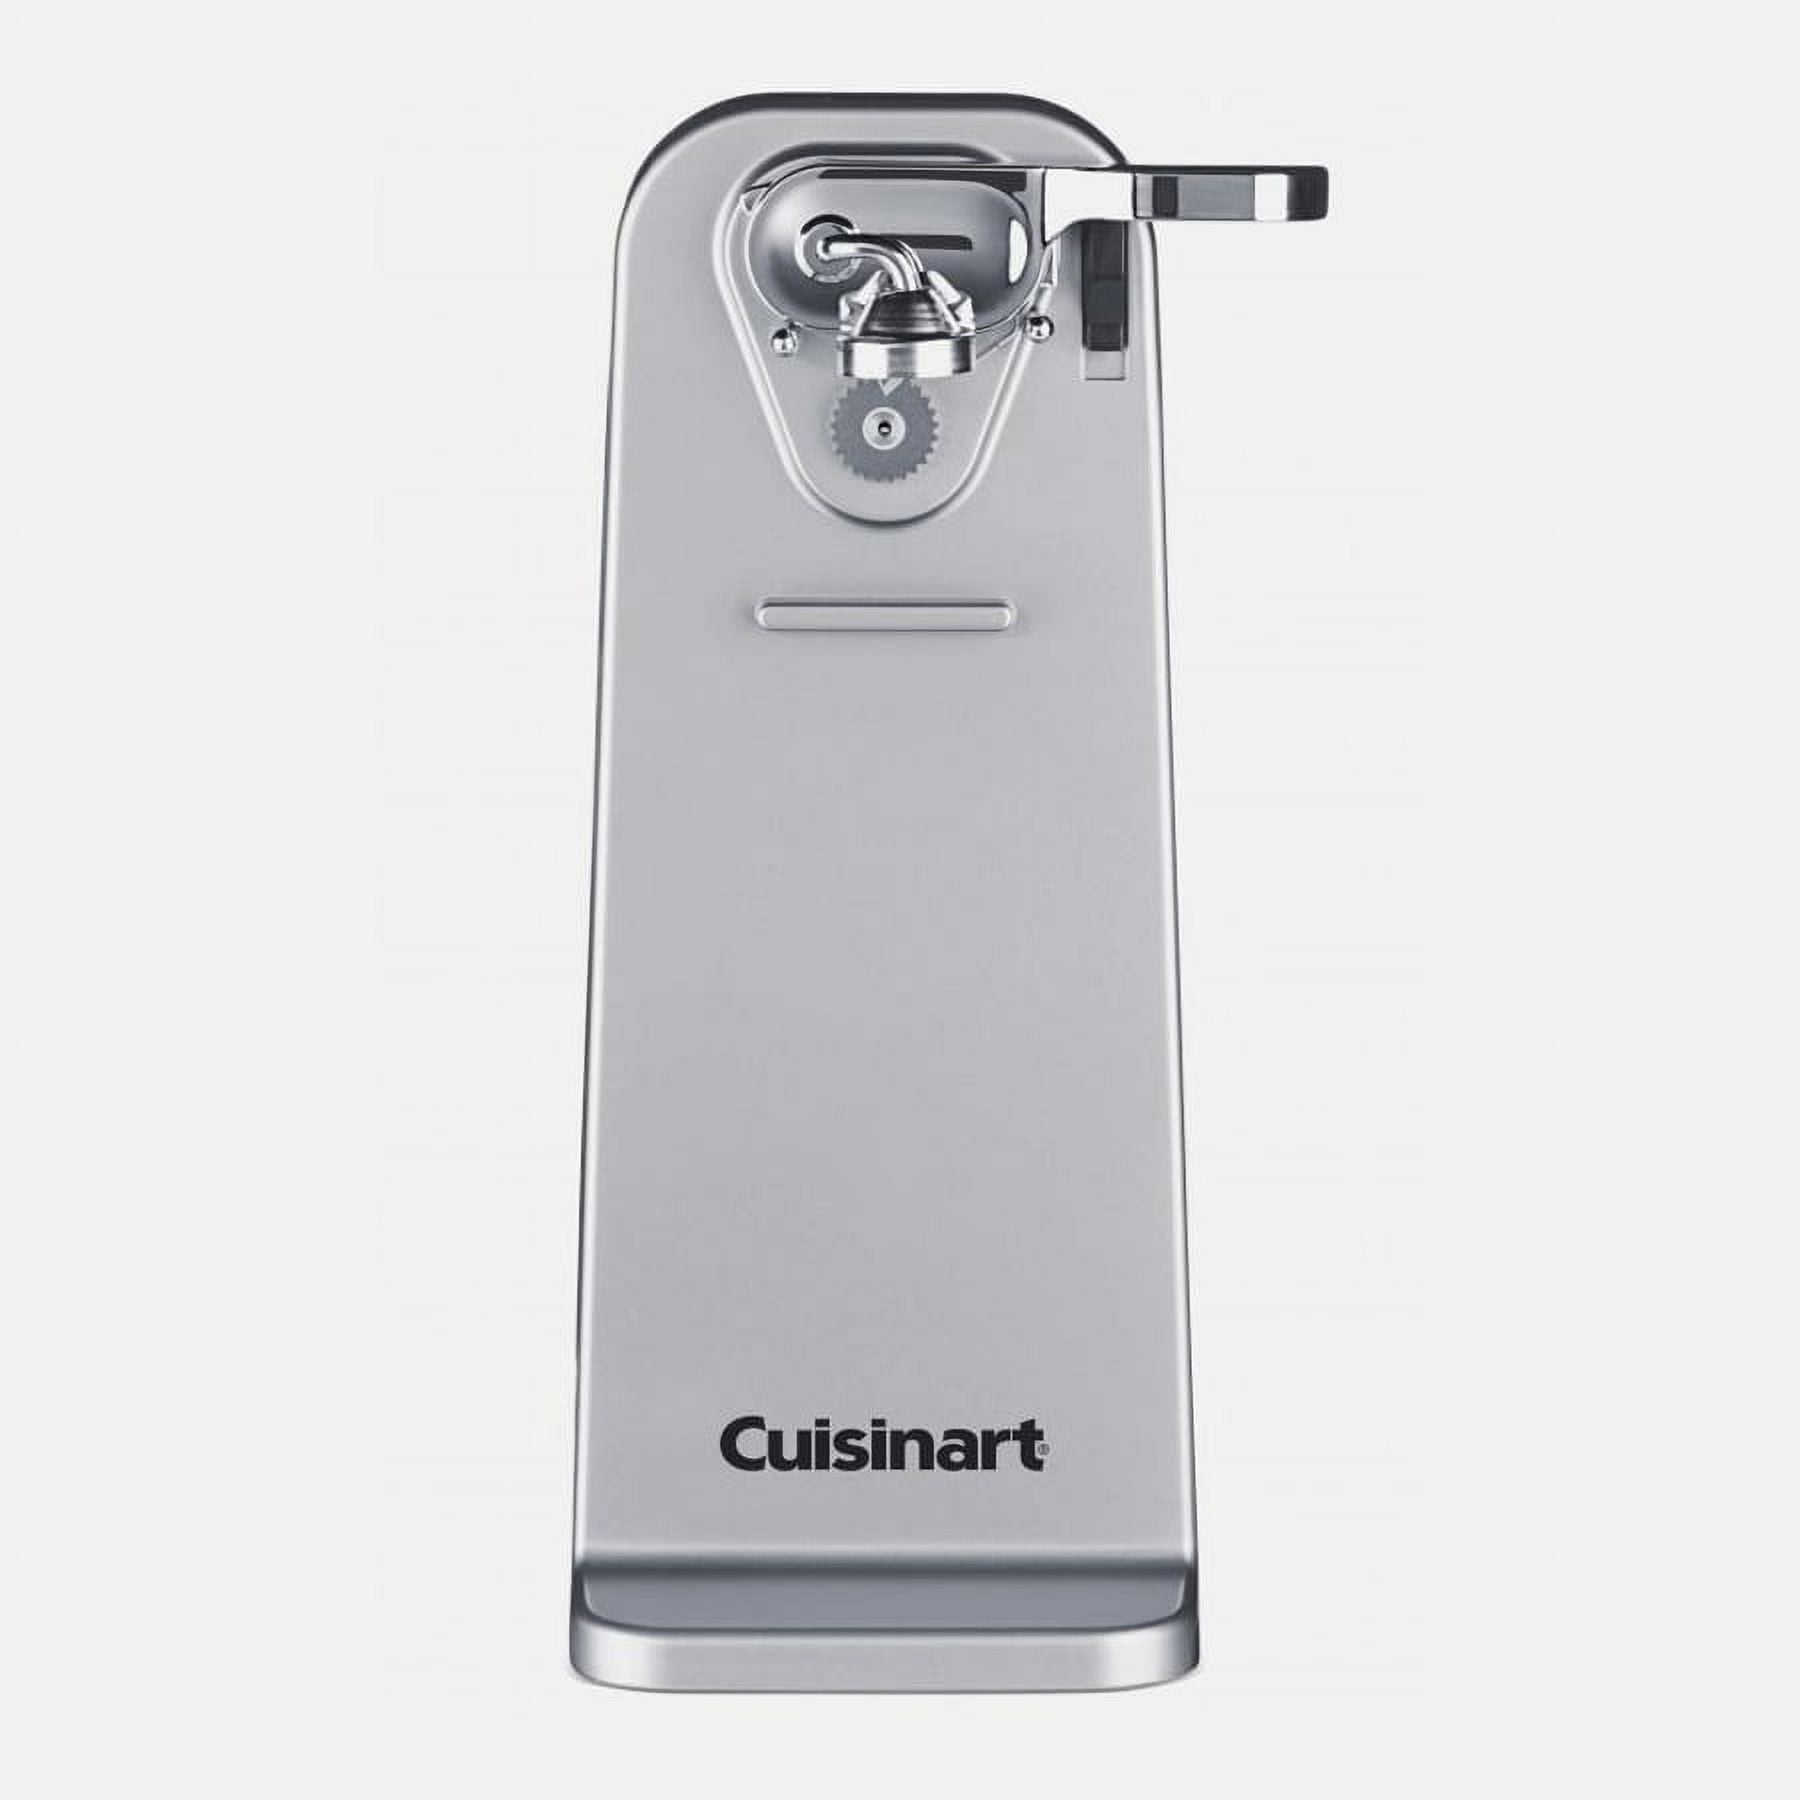 Cuisinart Automatic Can Opener 9 516 H x 5 34 W x 5 34 D Chrome